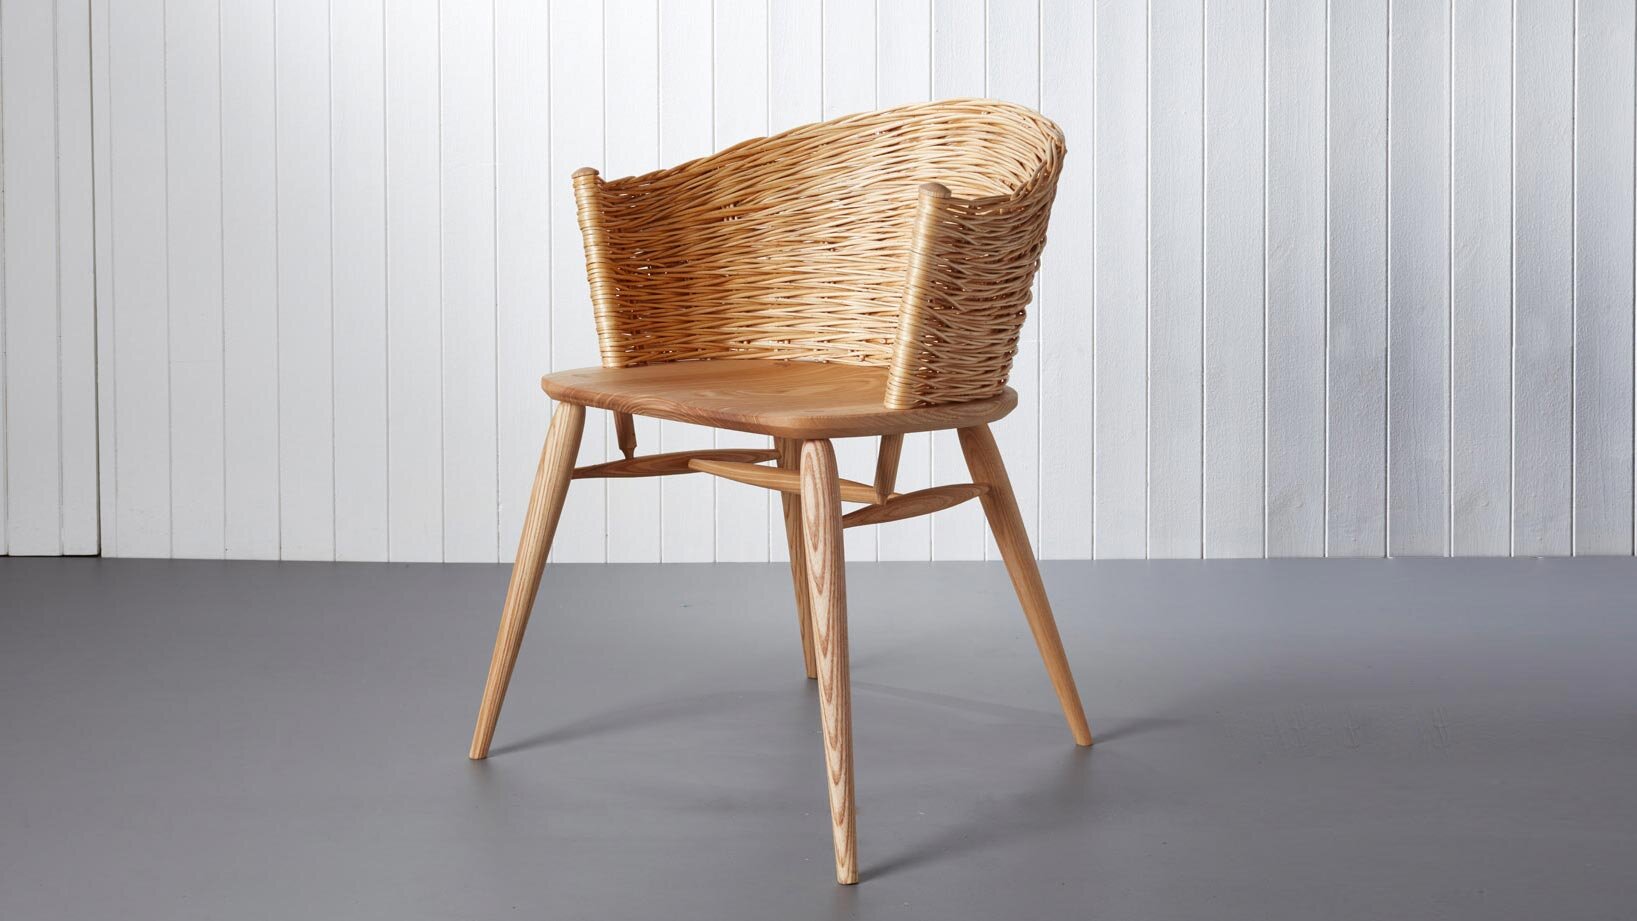 Woven willow dining chair